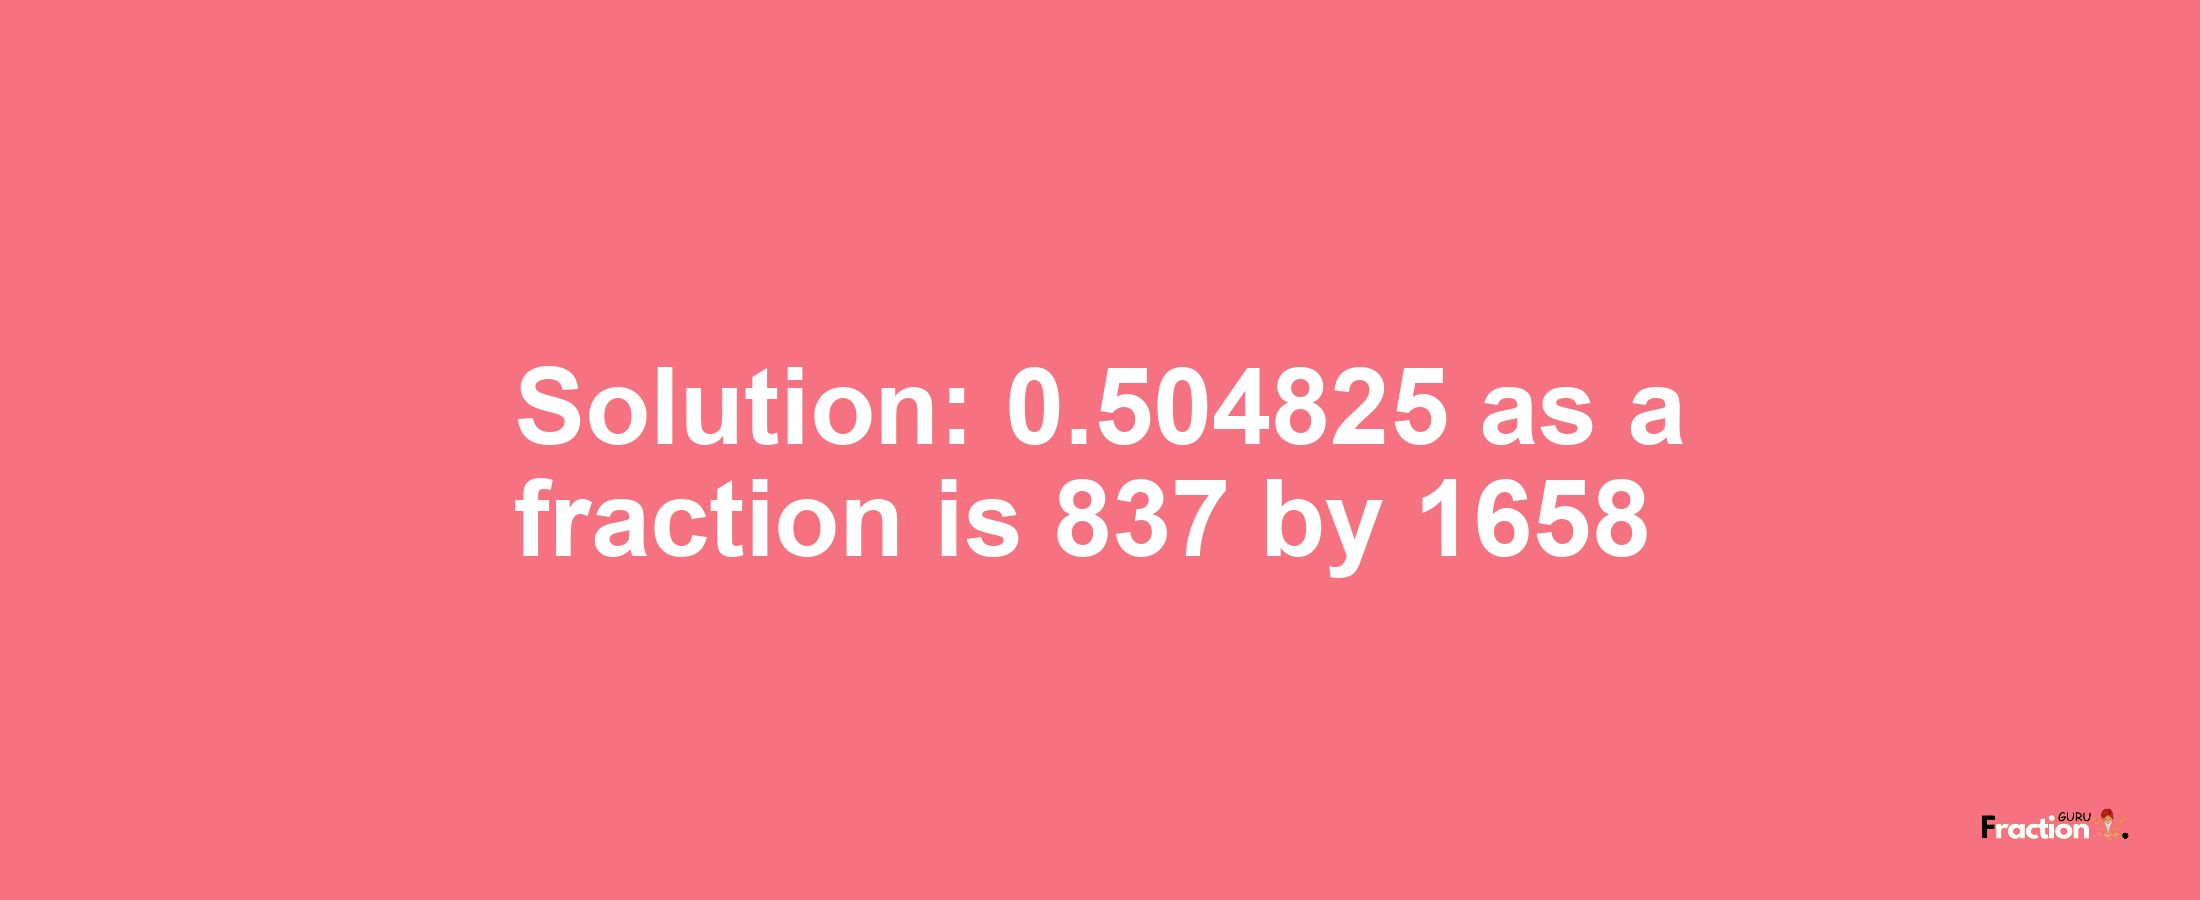 Solution:0.504825 as a fraction is 837/1658